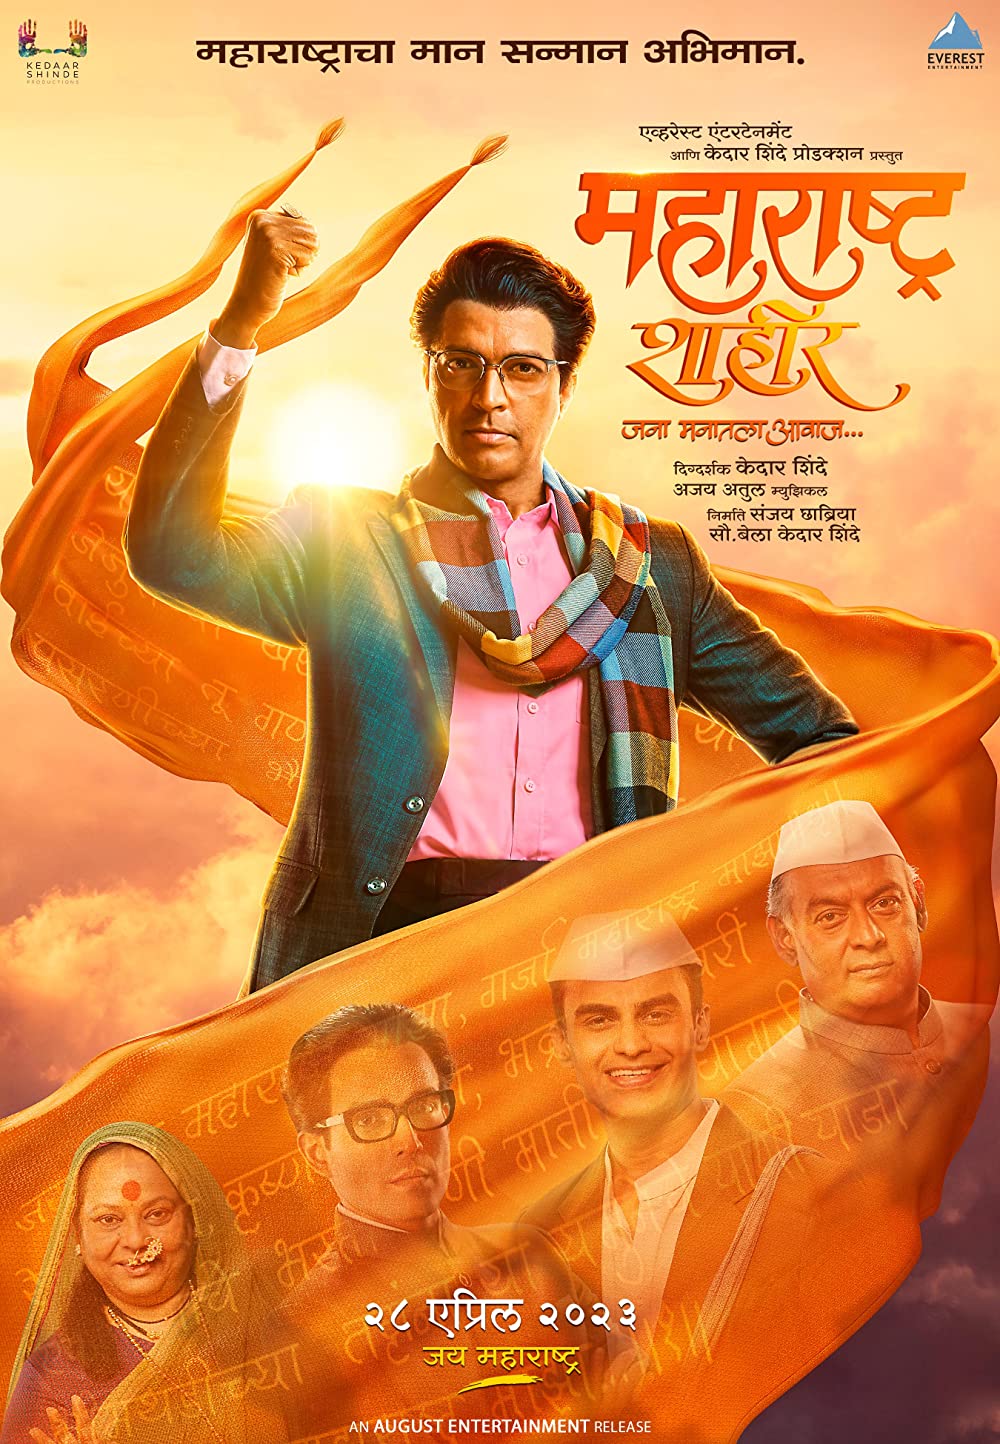 Maharashtra Shahir Movie (2023) Cast, Release Date, Story, Budget, Collection, Poster, Trailer, Review